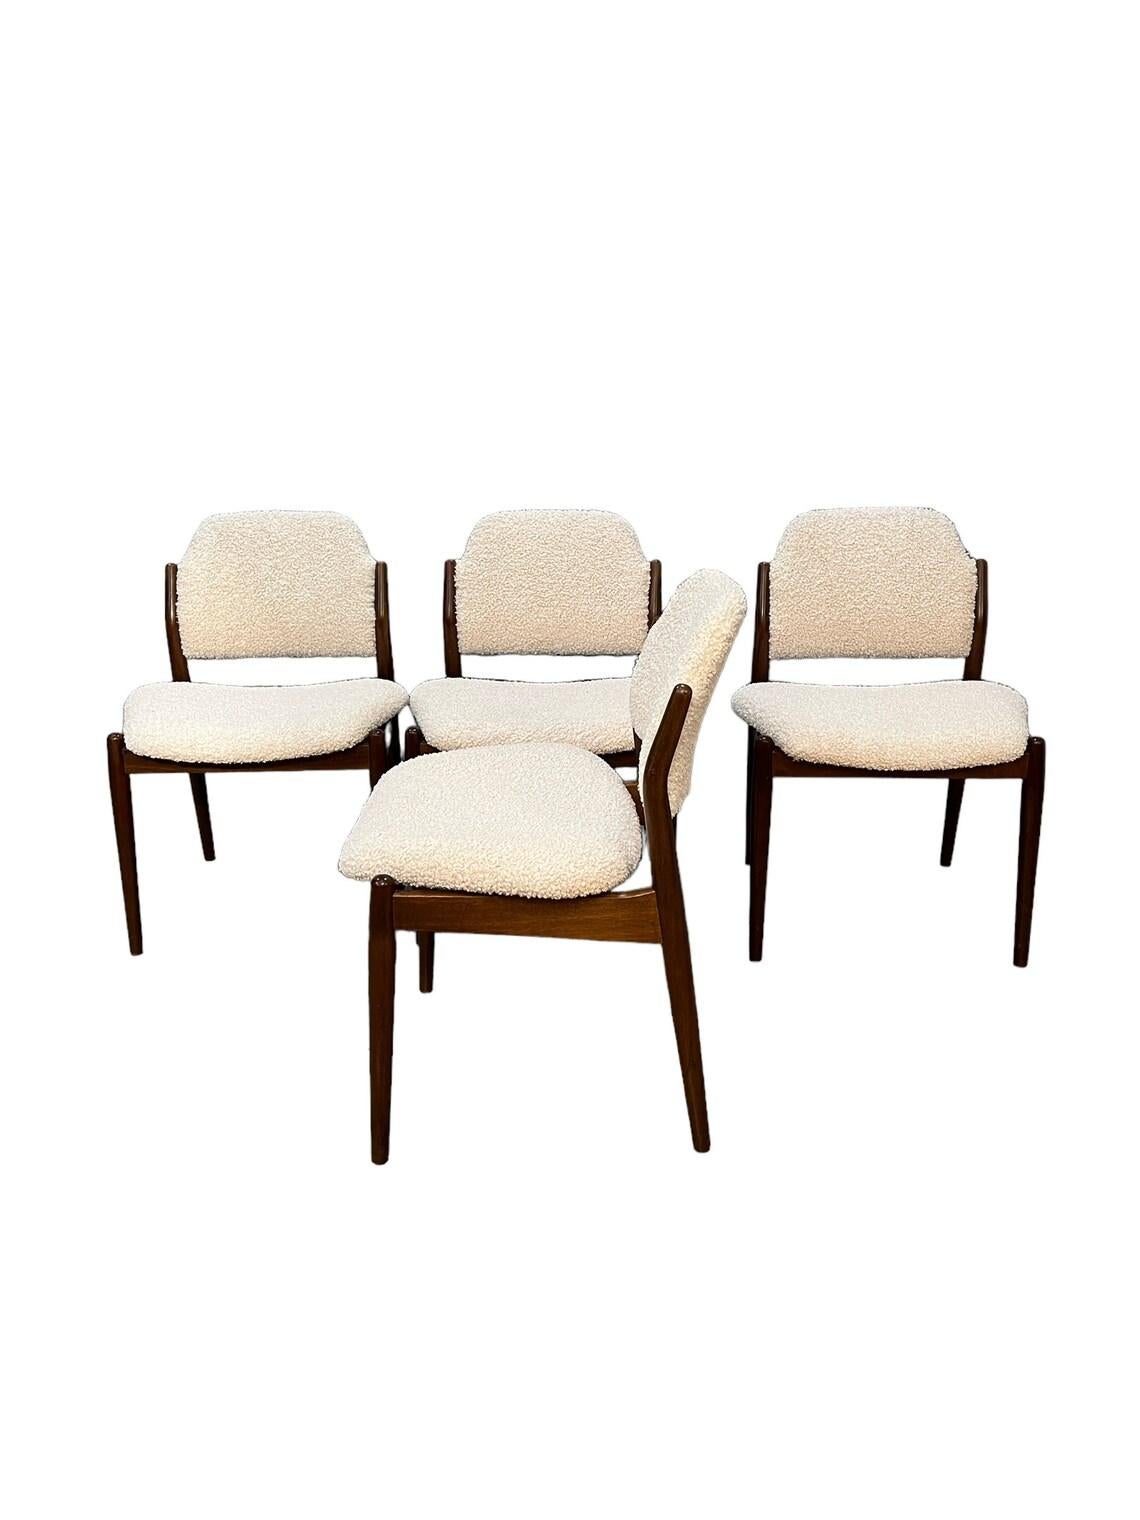 Mid-Century danish rosewood dining chairs set of 4 with new cream boucle cotton upholstery 1960’s circa 
In perfect condition like new.
Dimensions: W22 x D19 x H32 inches
